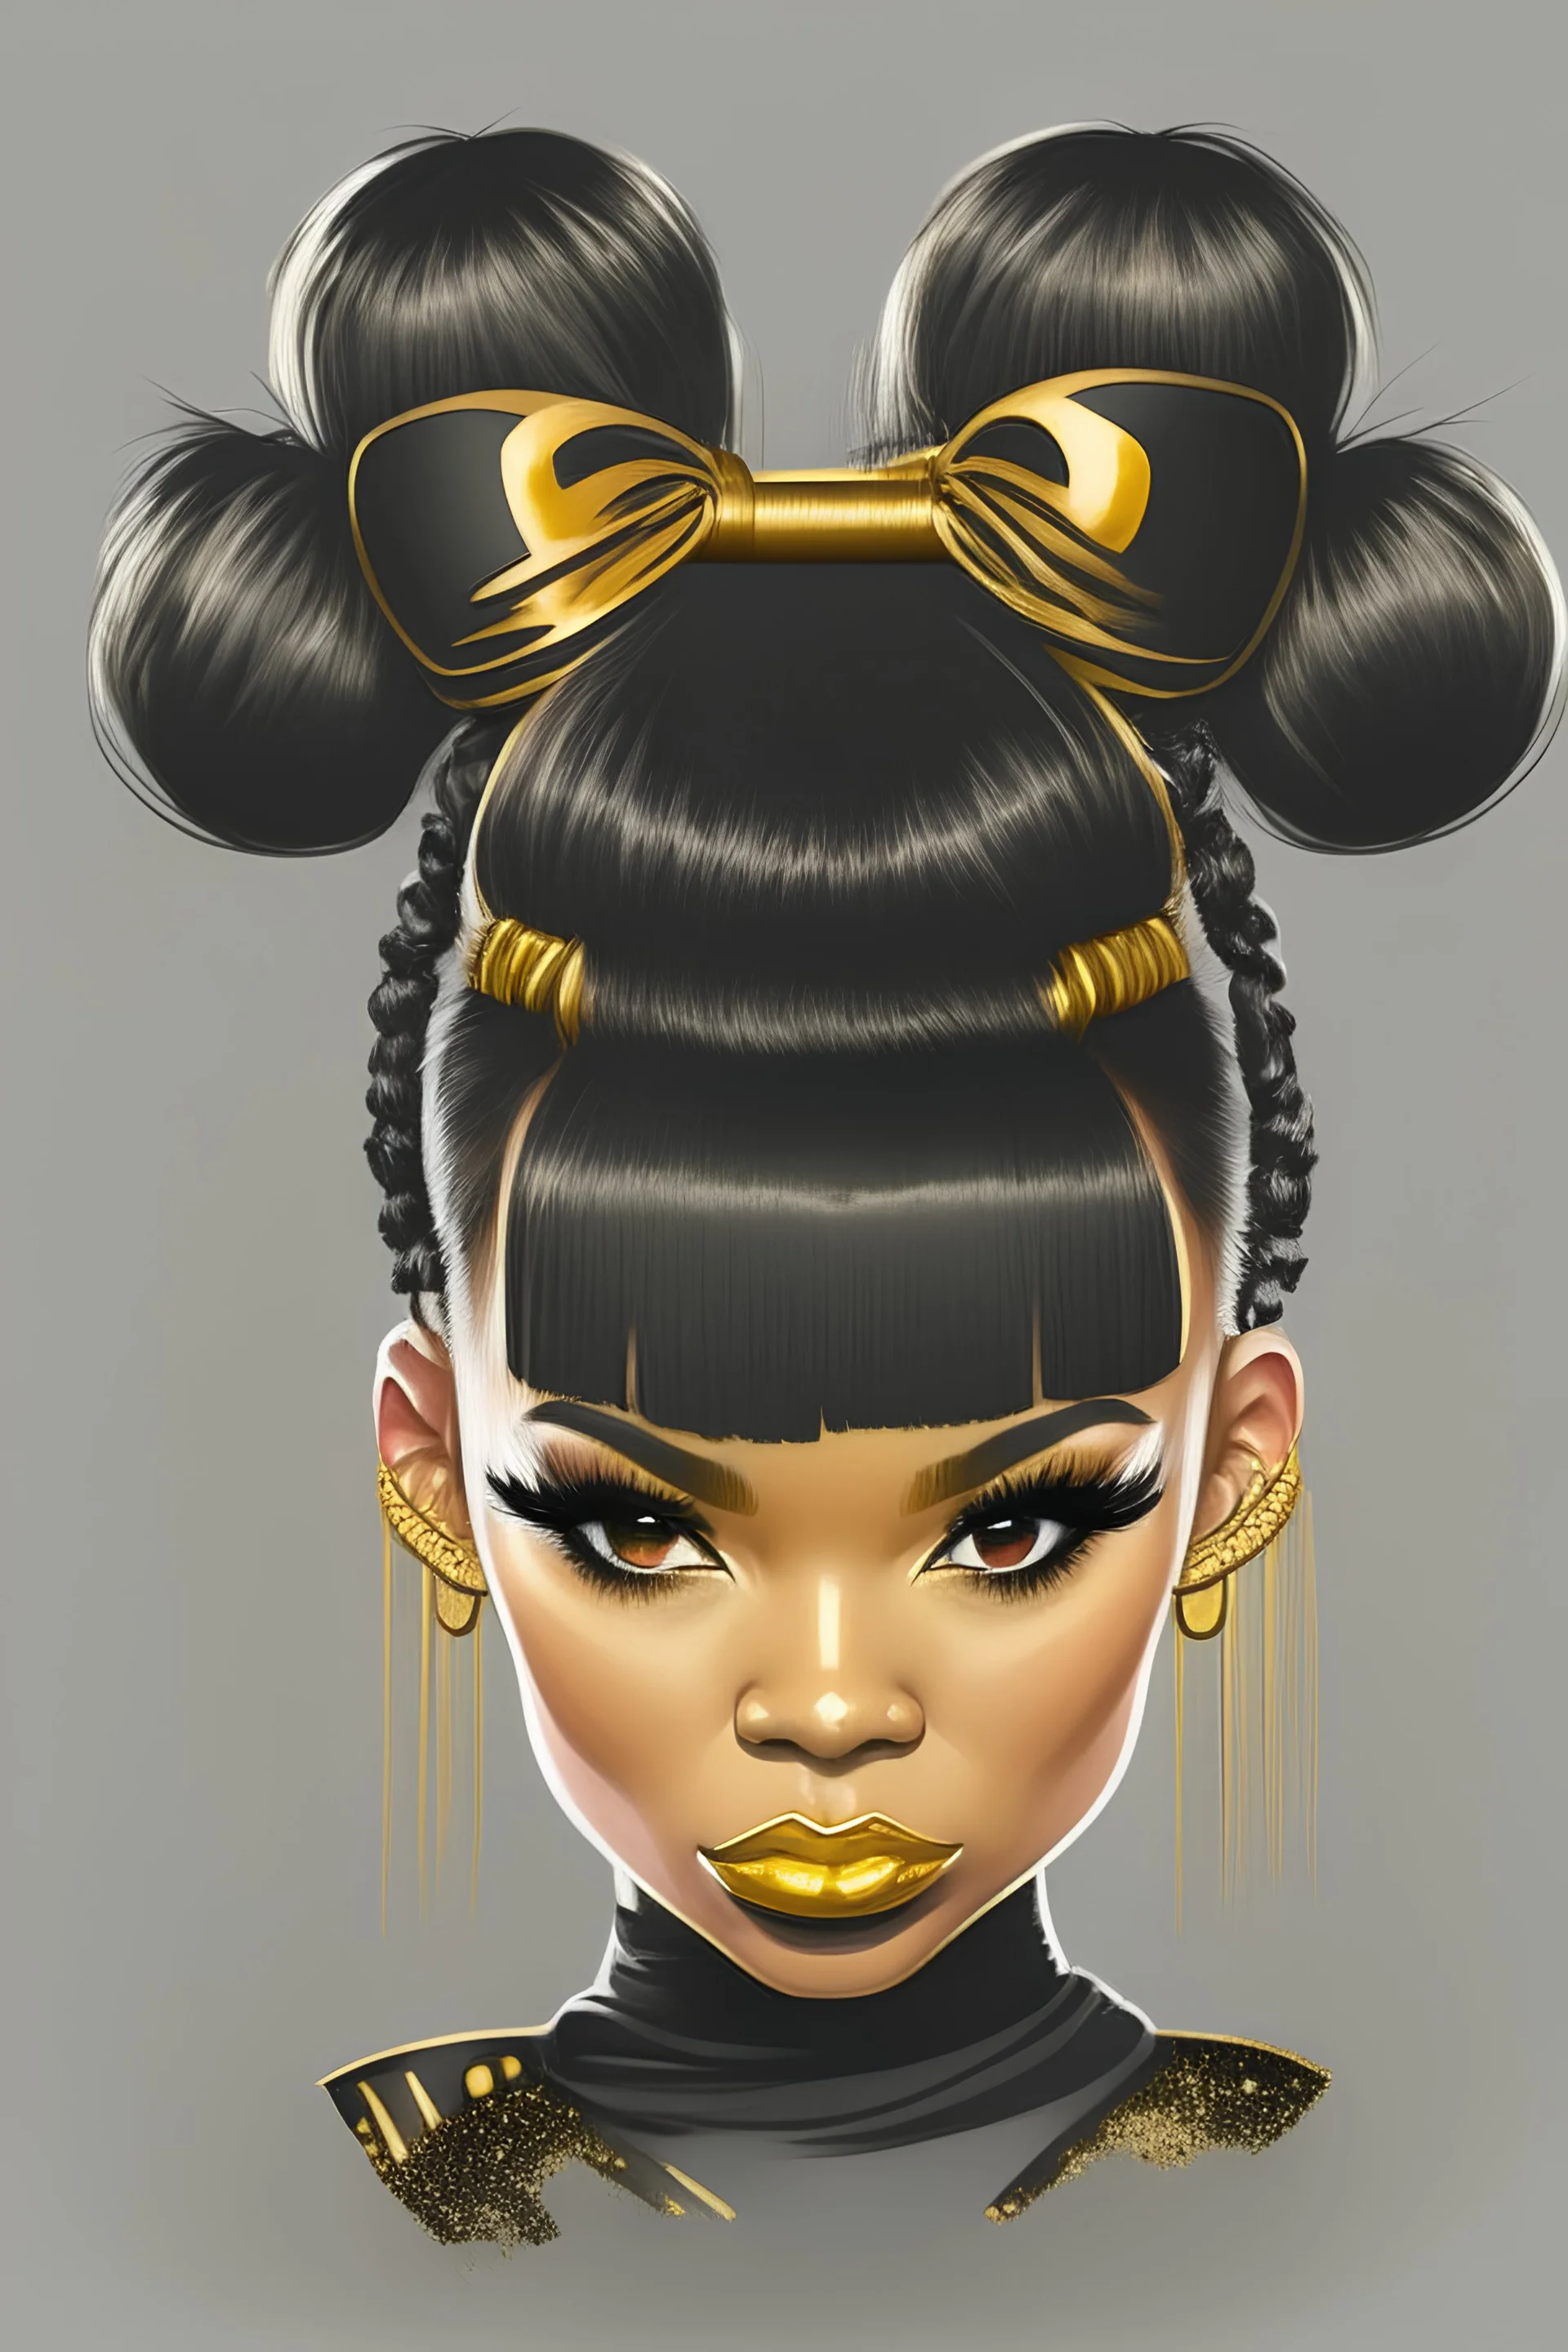 Black and gold girl with two buns and fringe hairstyle, logo deaign